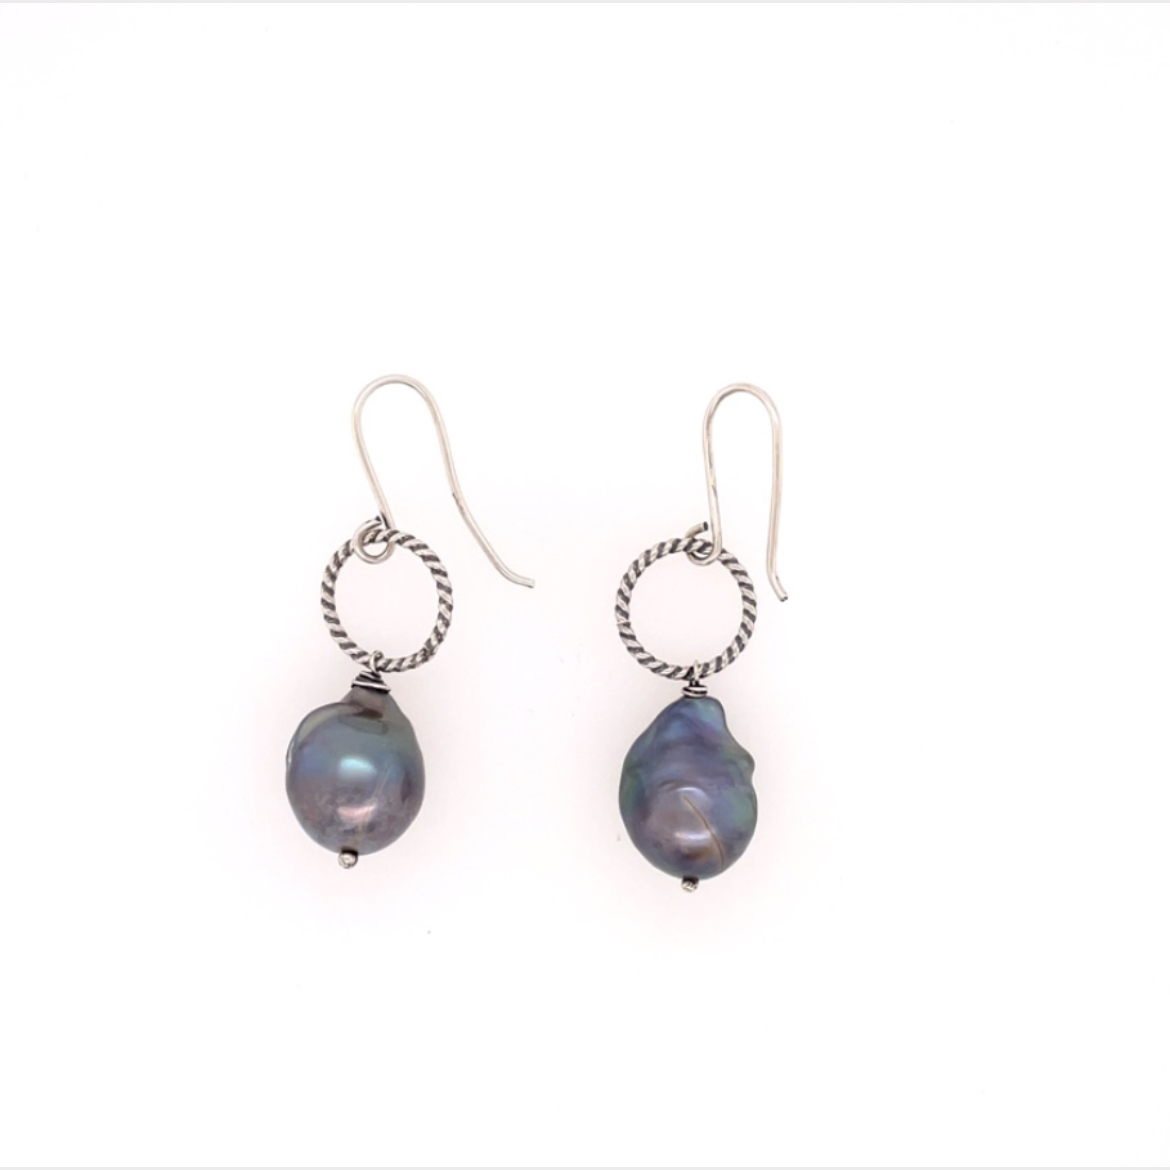 Peacock Blue Baroque Pearl Earrings with Textured Circle Element